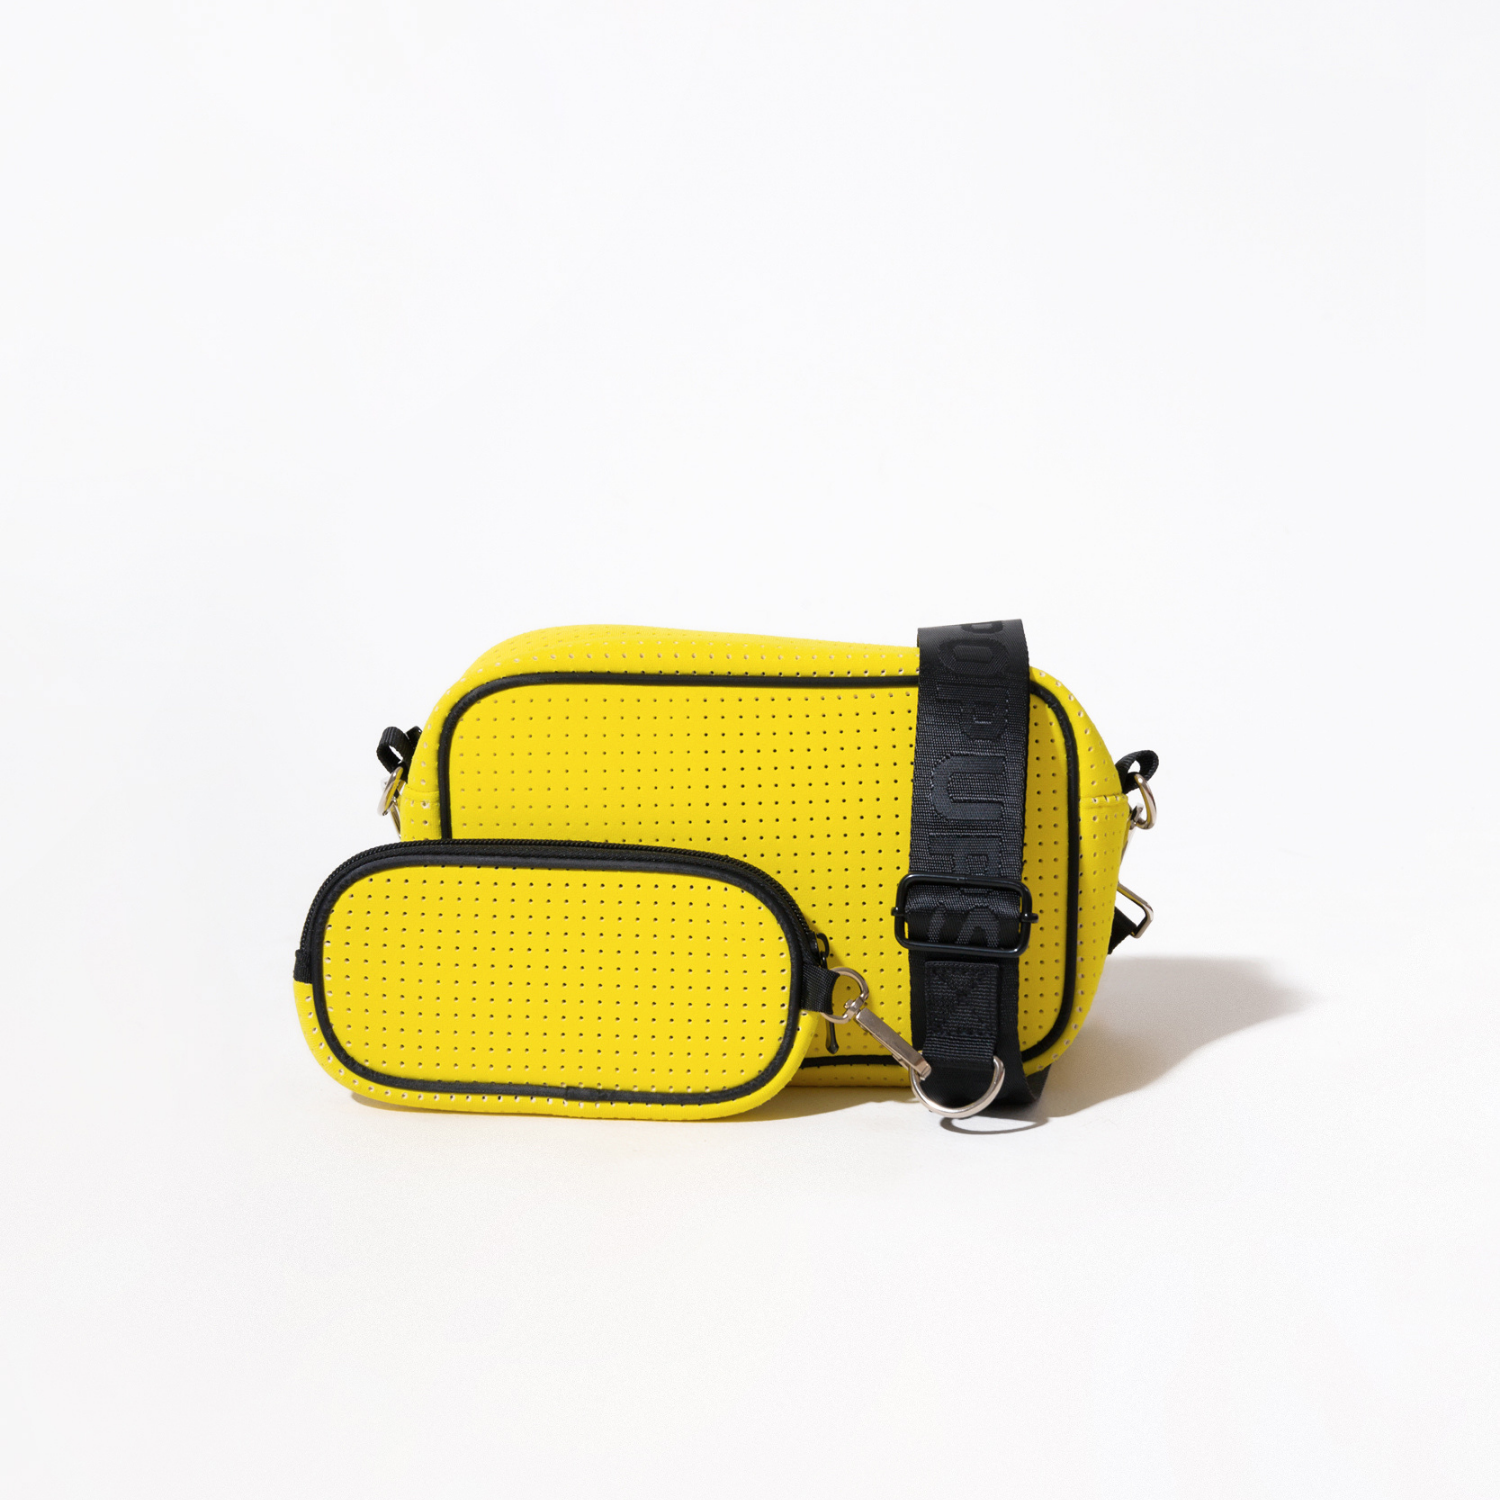 Brand New Camera Bag - adjustable crossbody and perfect every day